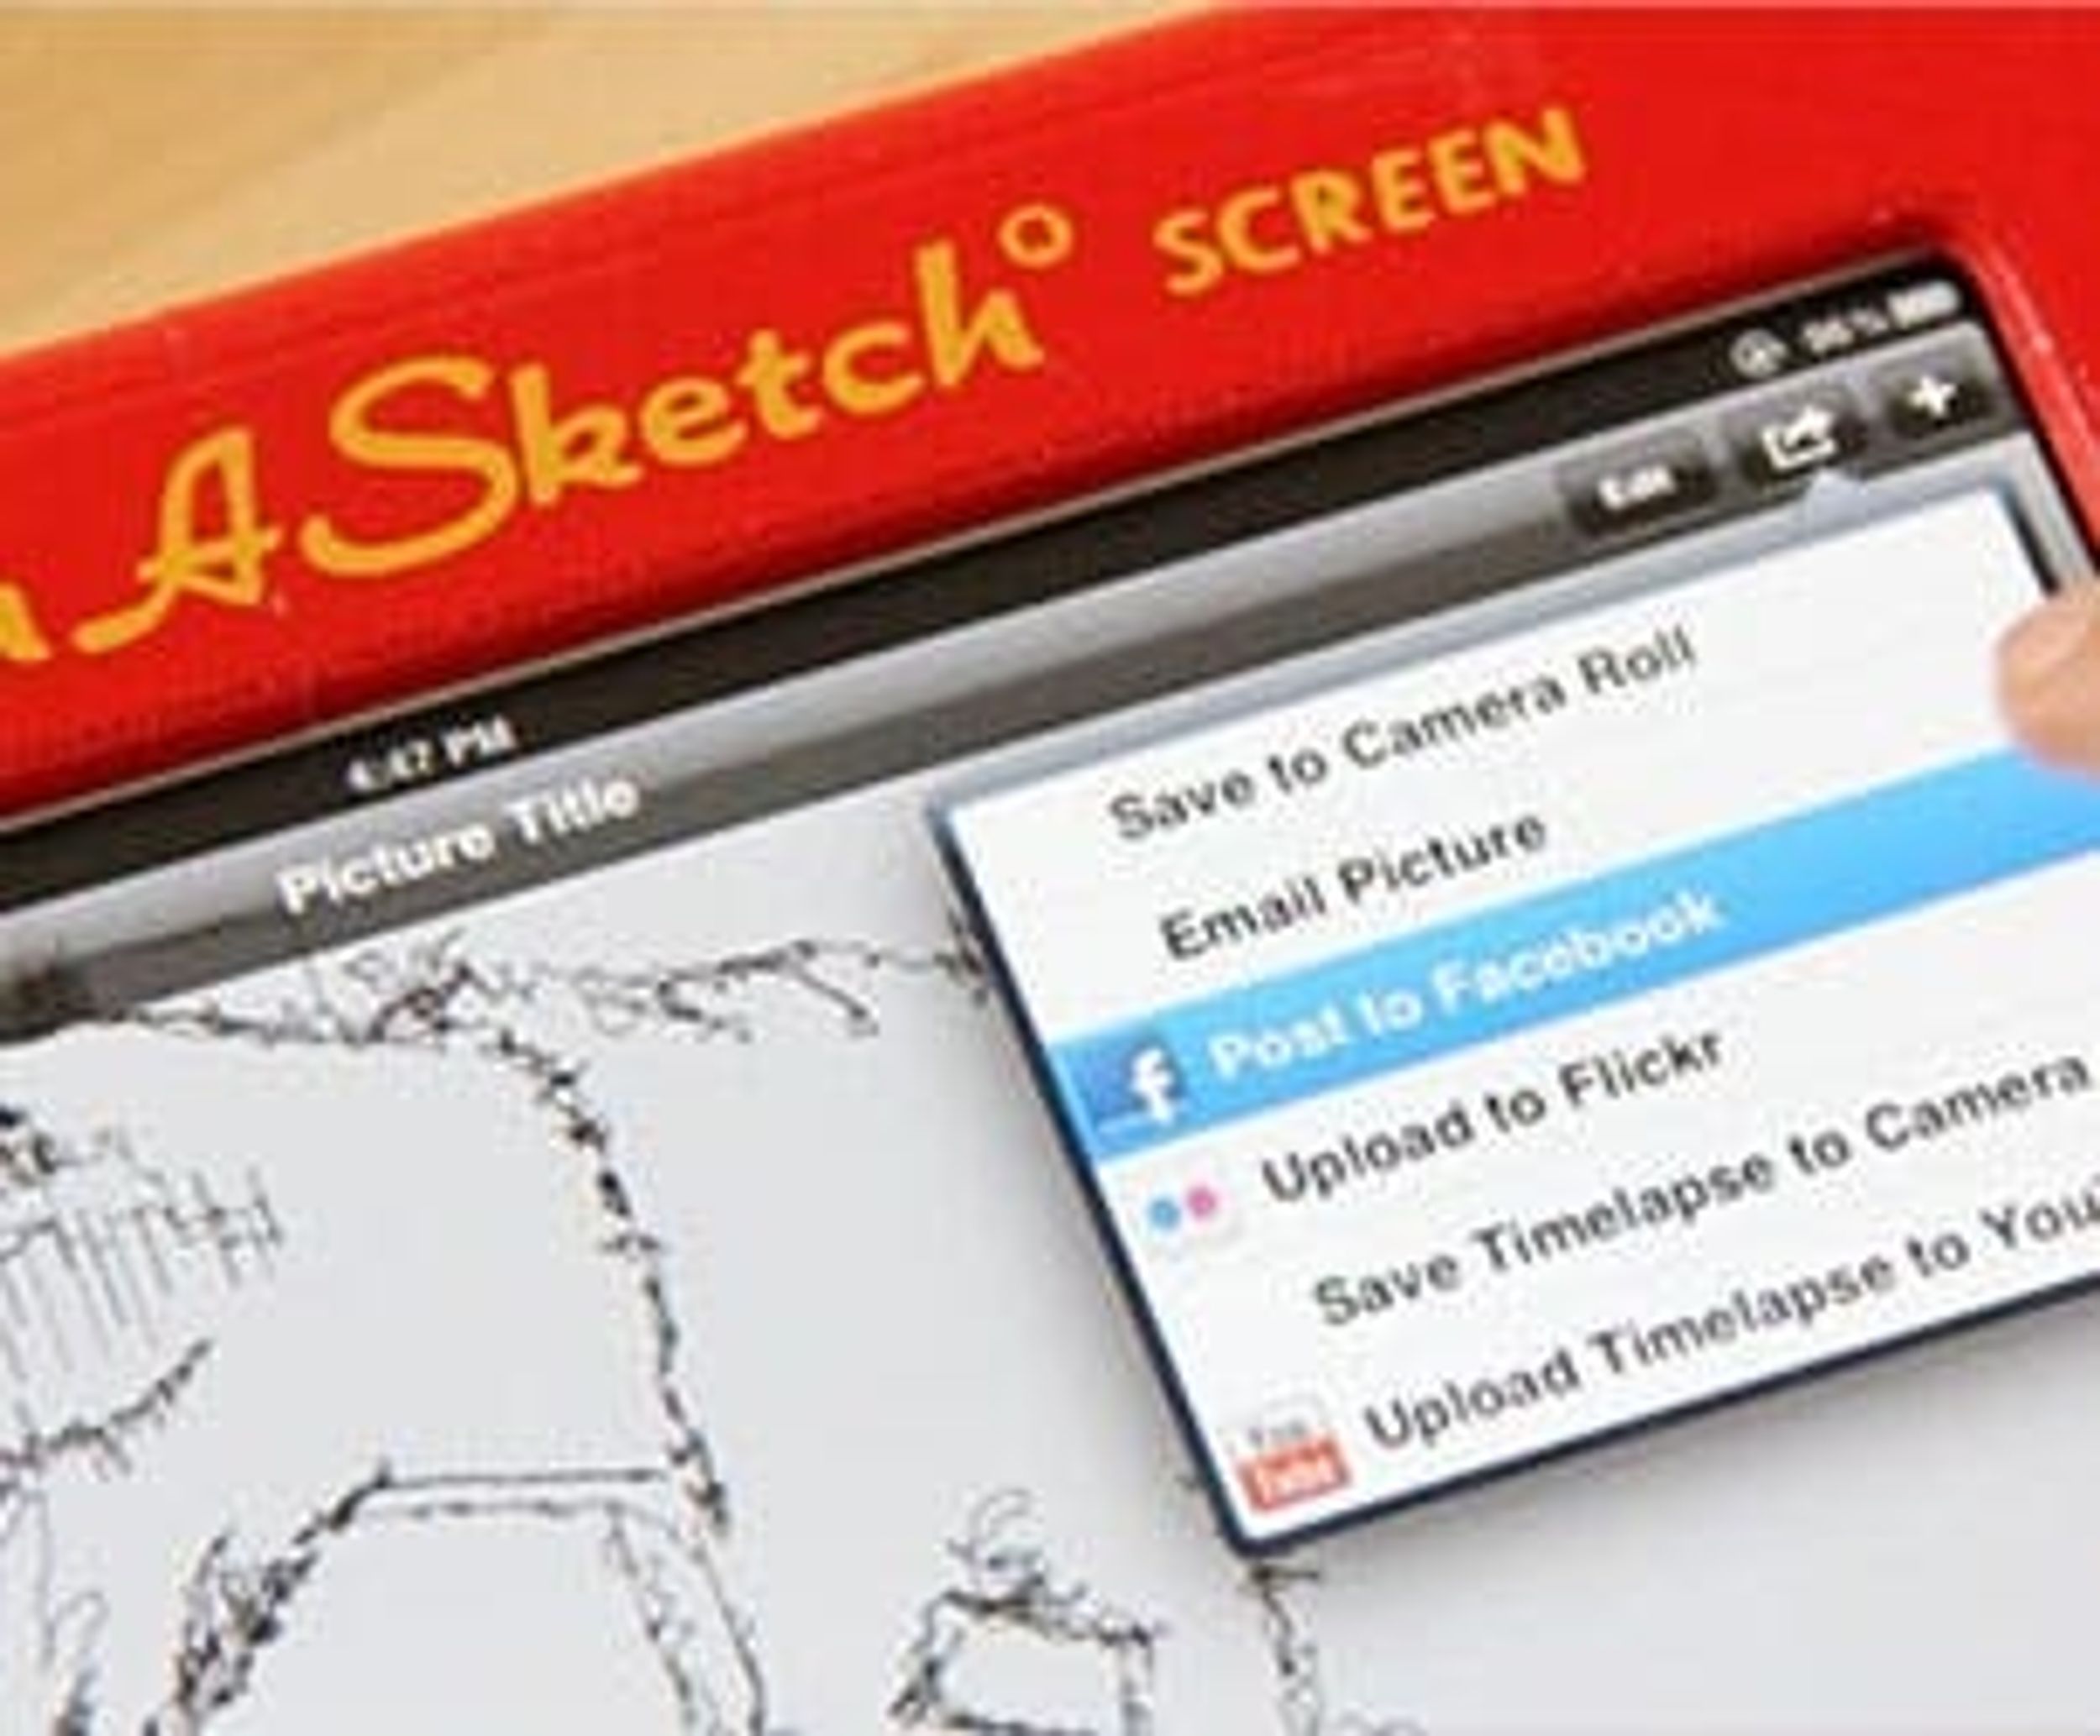 Transform Your iPad into an Old School Etch A Sketch